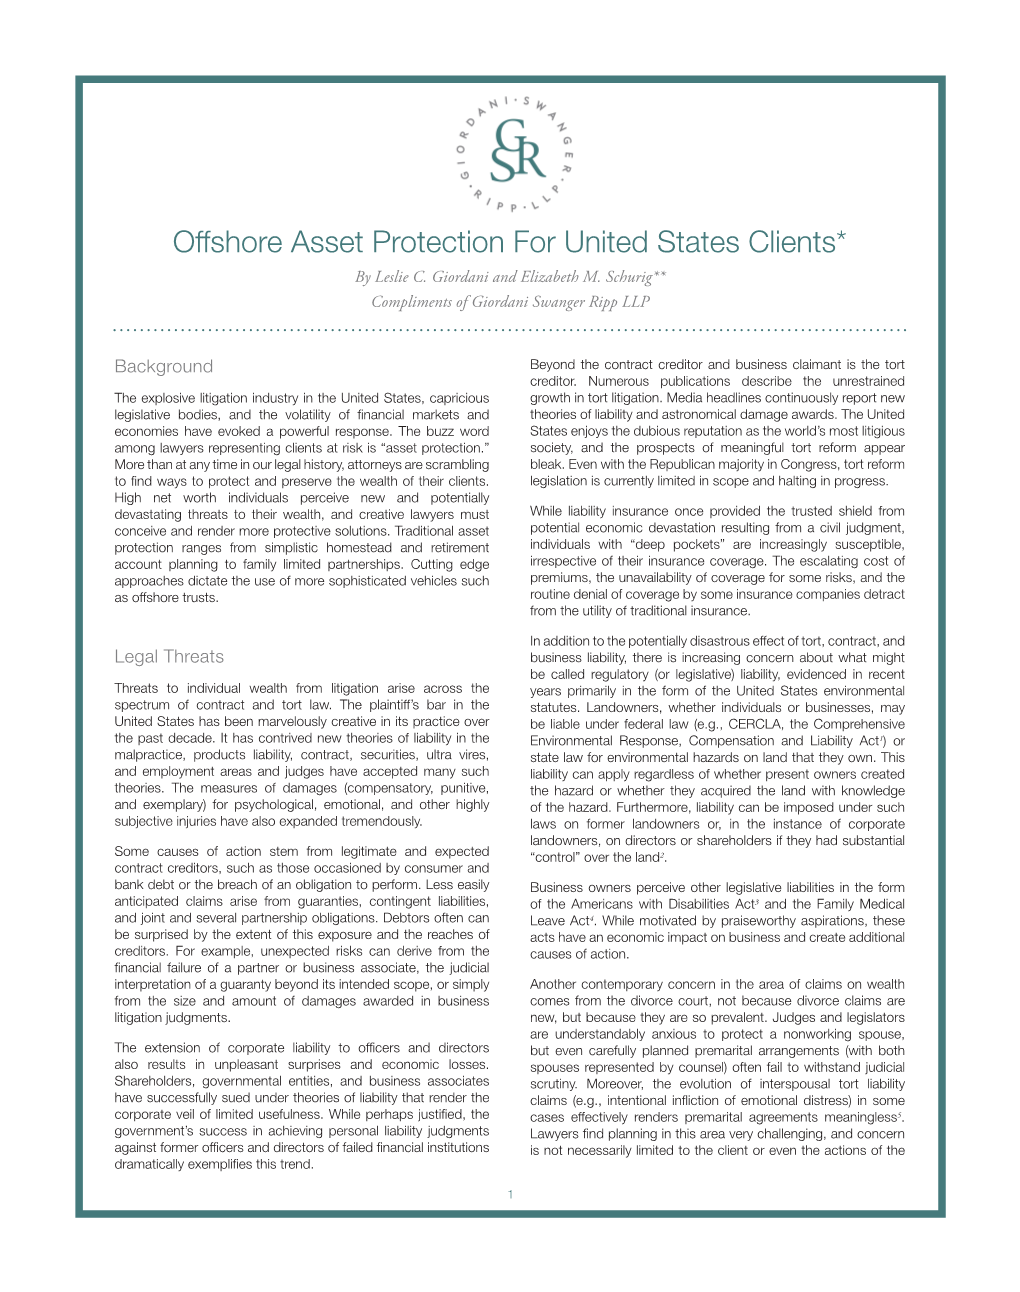 Offshore Asset Protection for United States Clients* by Leslie C